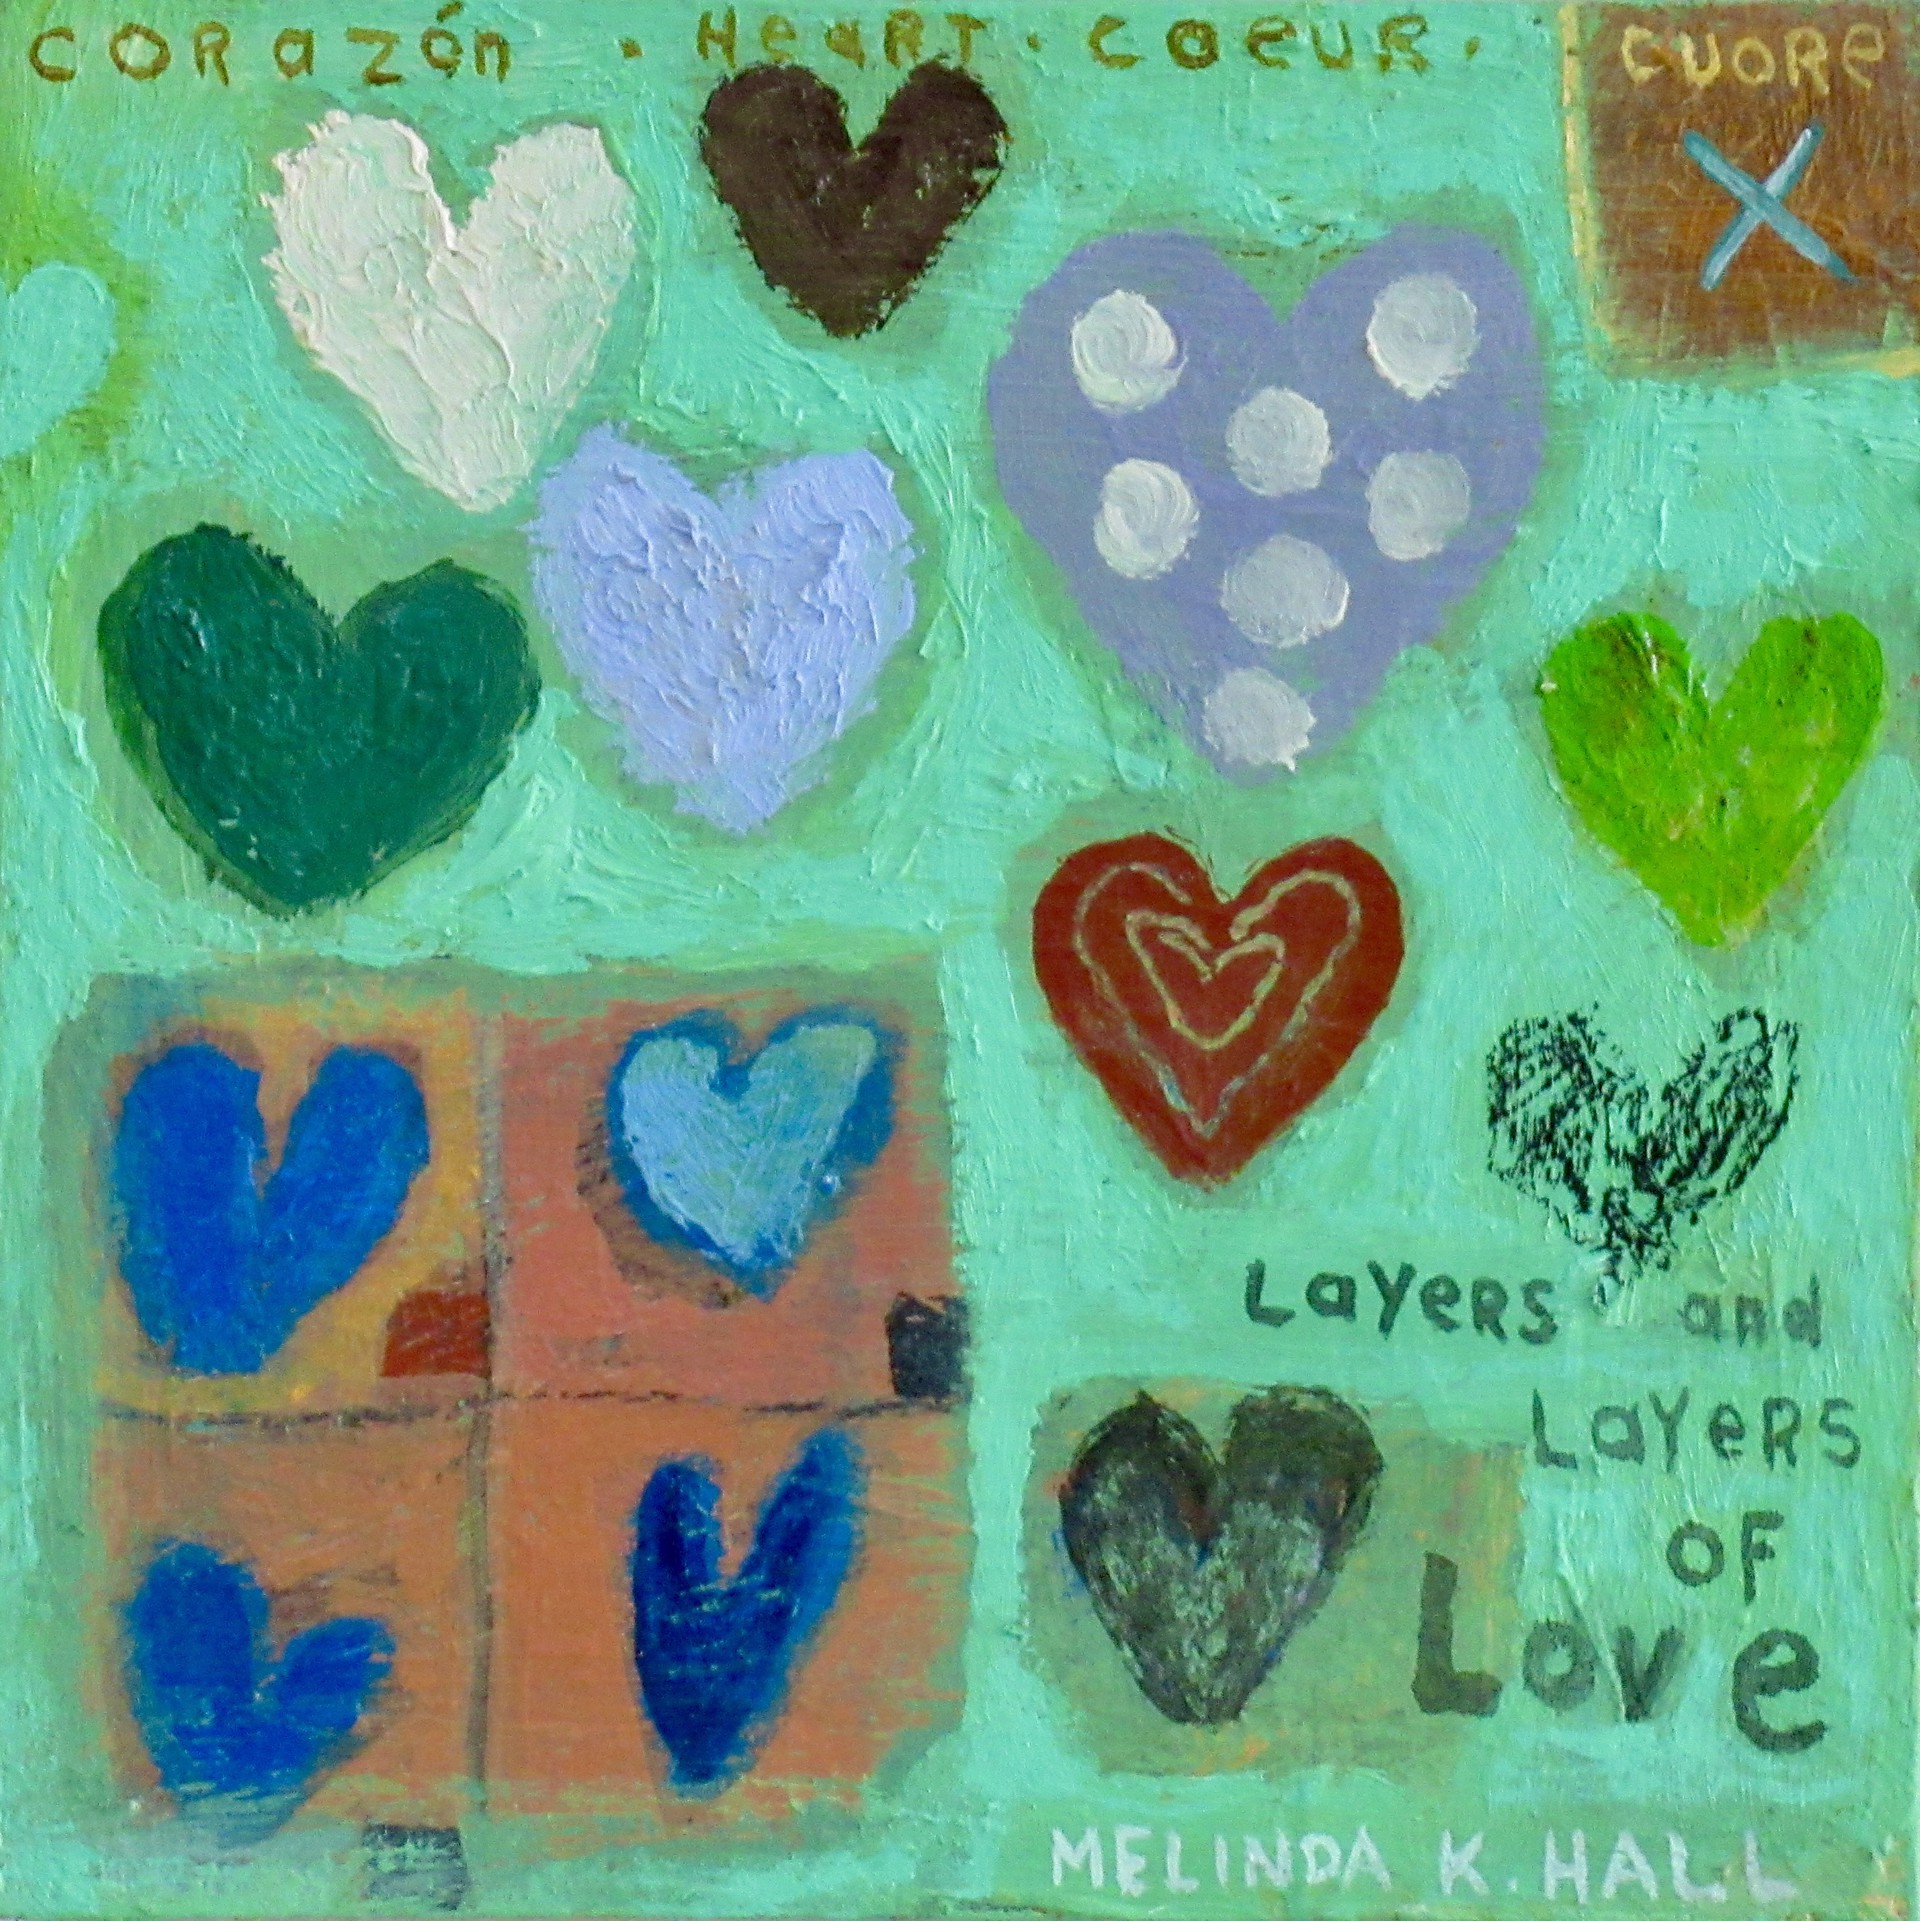 Layers and Layers of Love by Melinda K. Hall